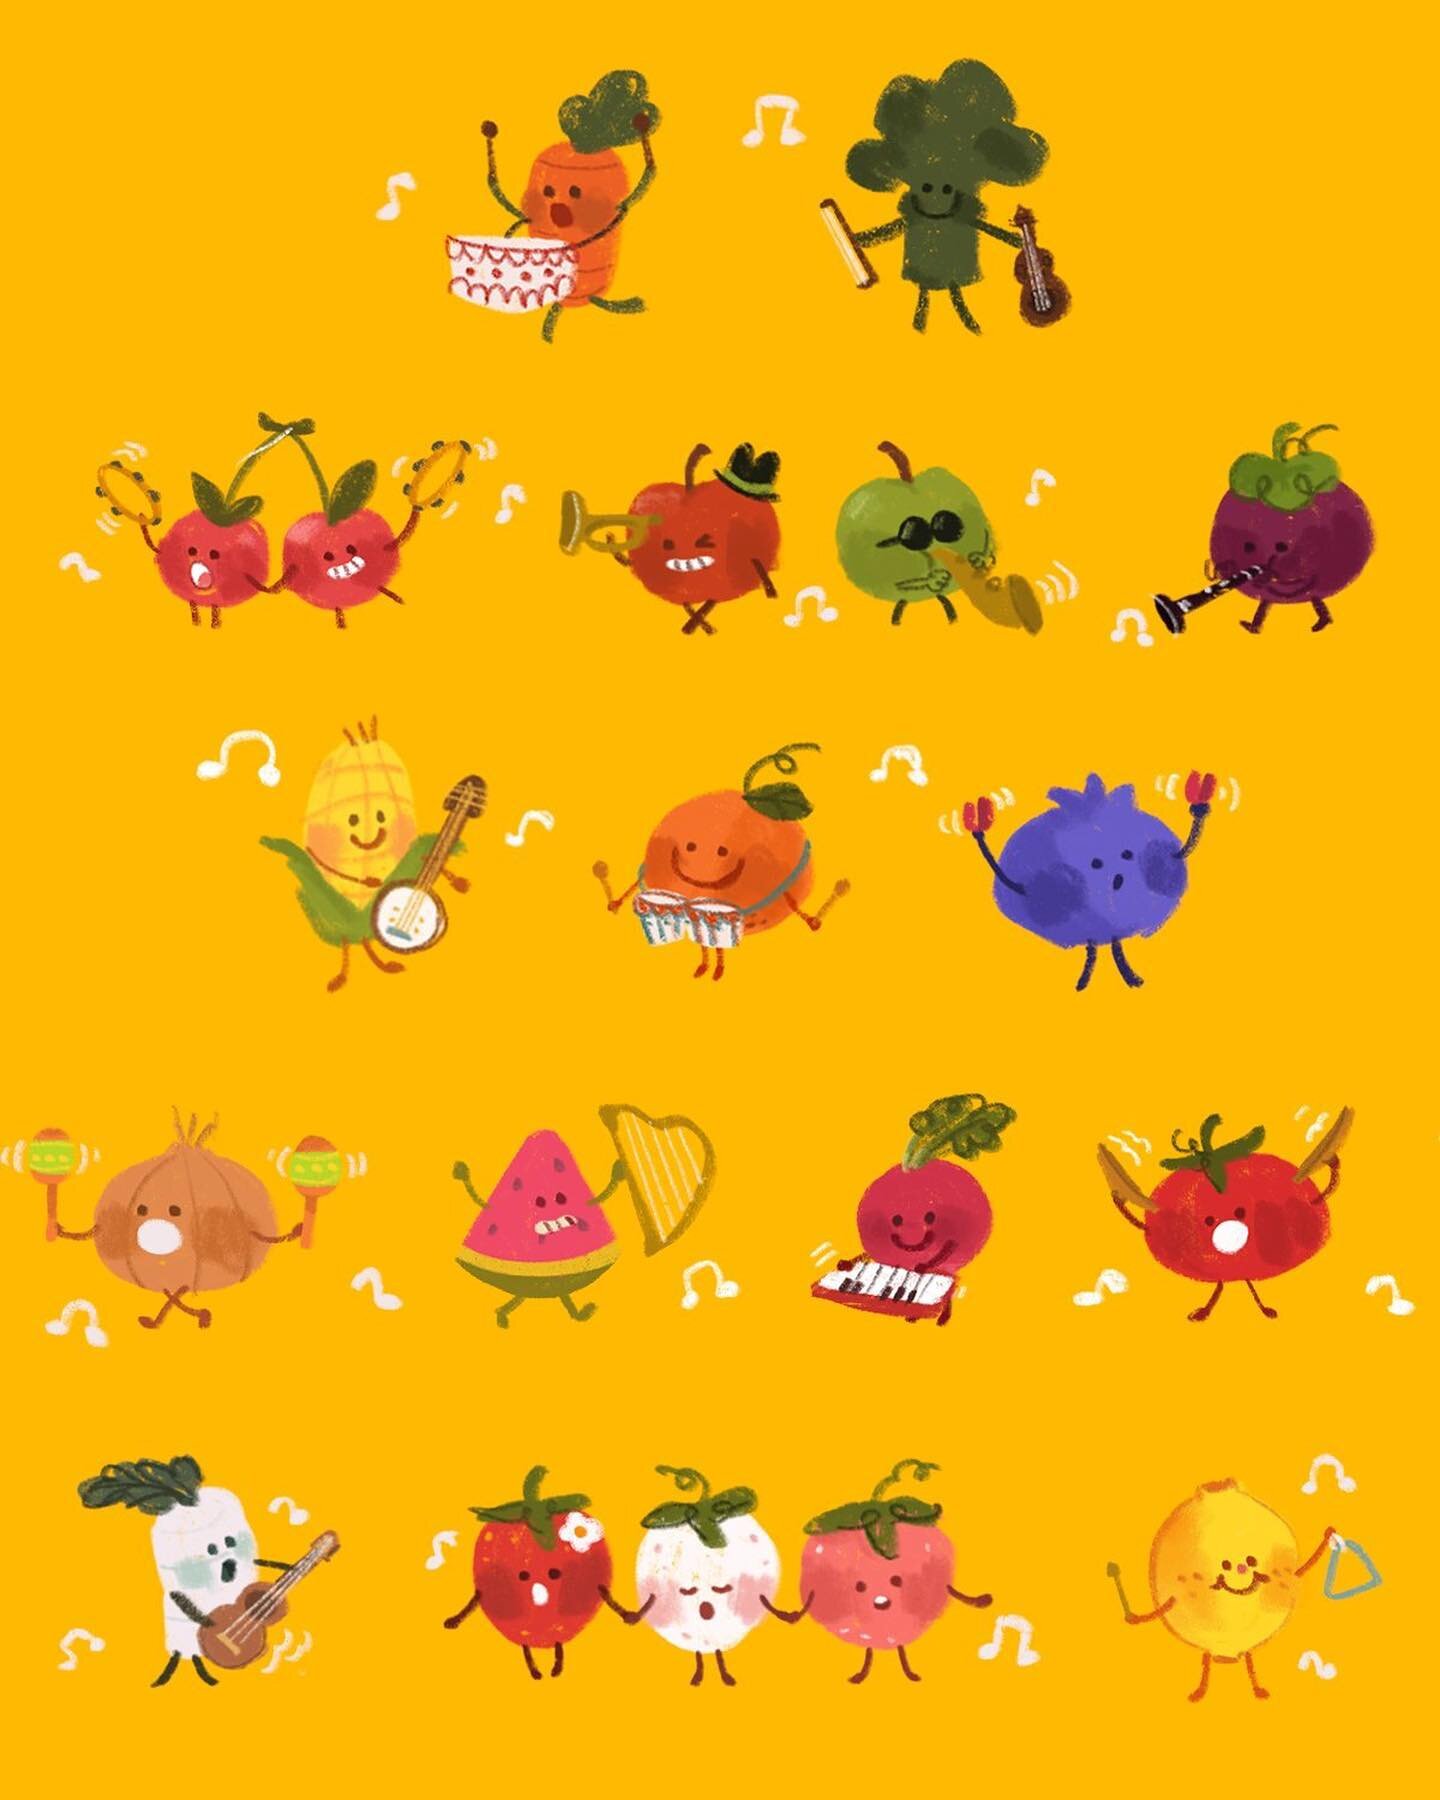 the produce parade is in town~! 🍎🥕🍅🌽🍓🍊🍋

i drew these fellas for washi tape, and it seems a shame the tape is too small to see them up close, so here you go!